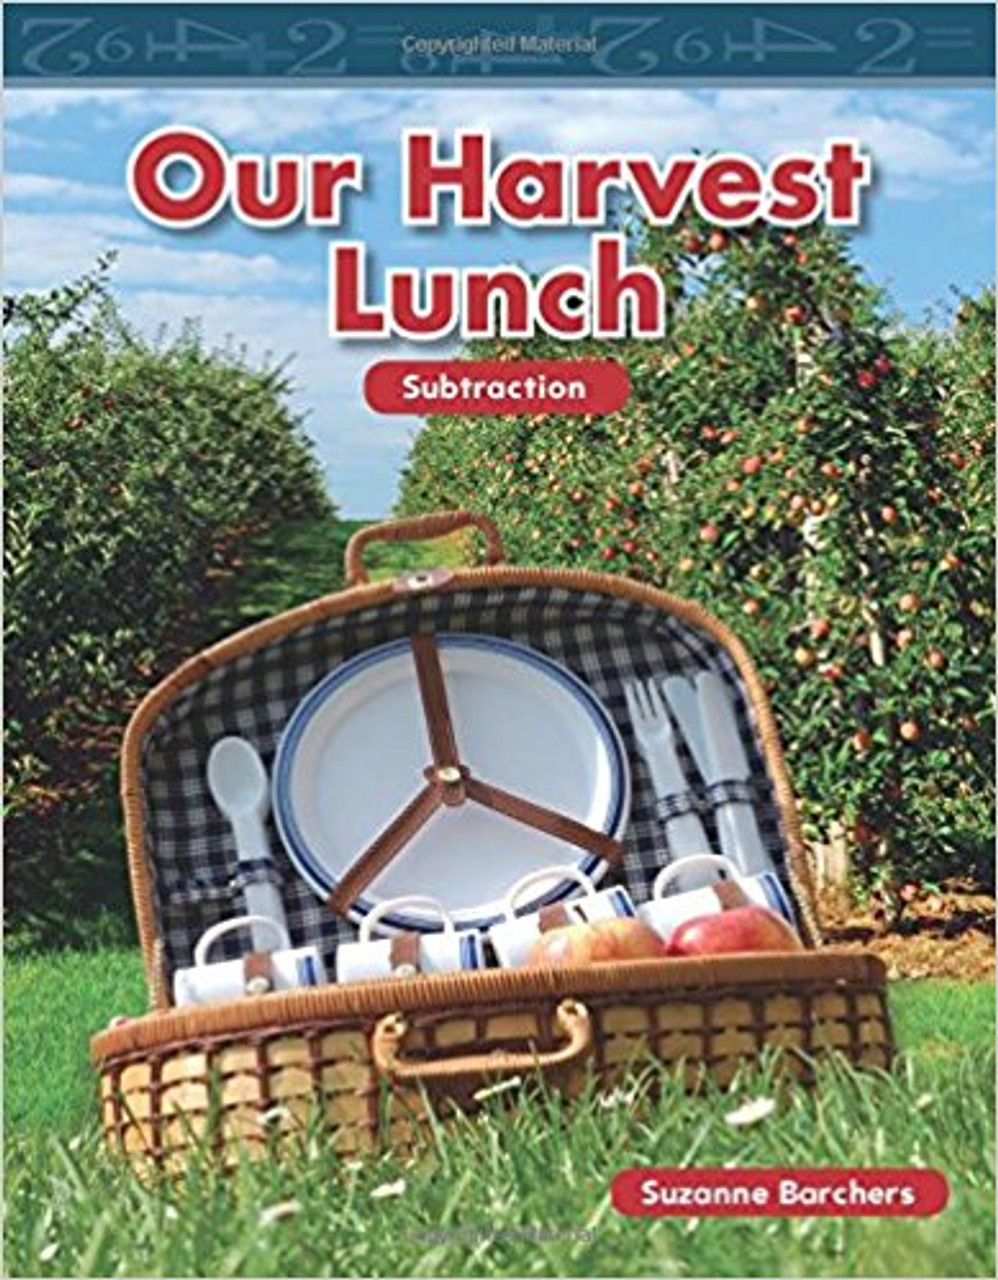 Our Harvest Lunch by Suzanne Barchers